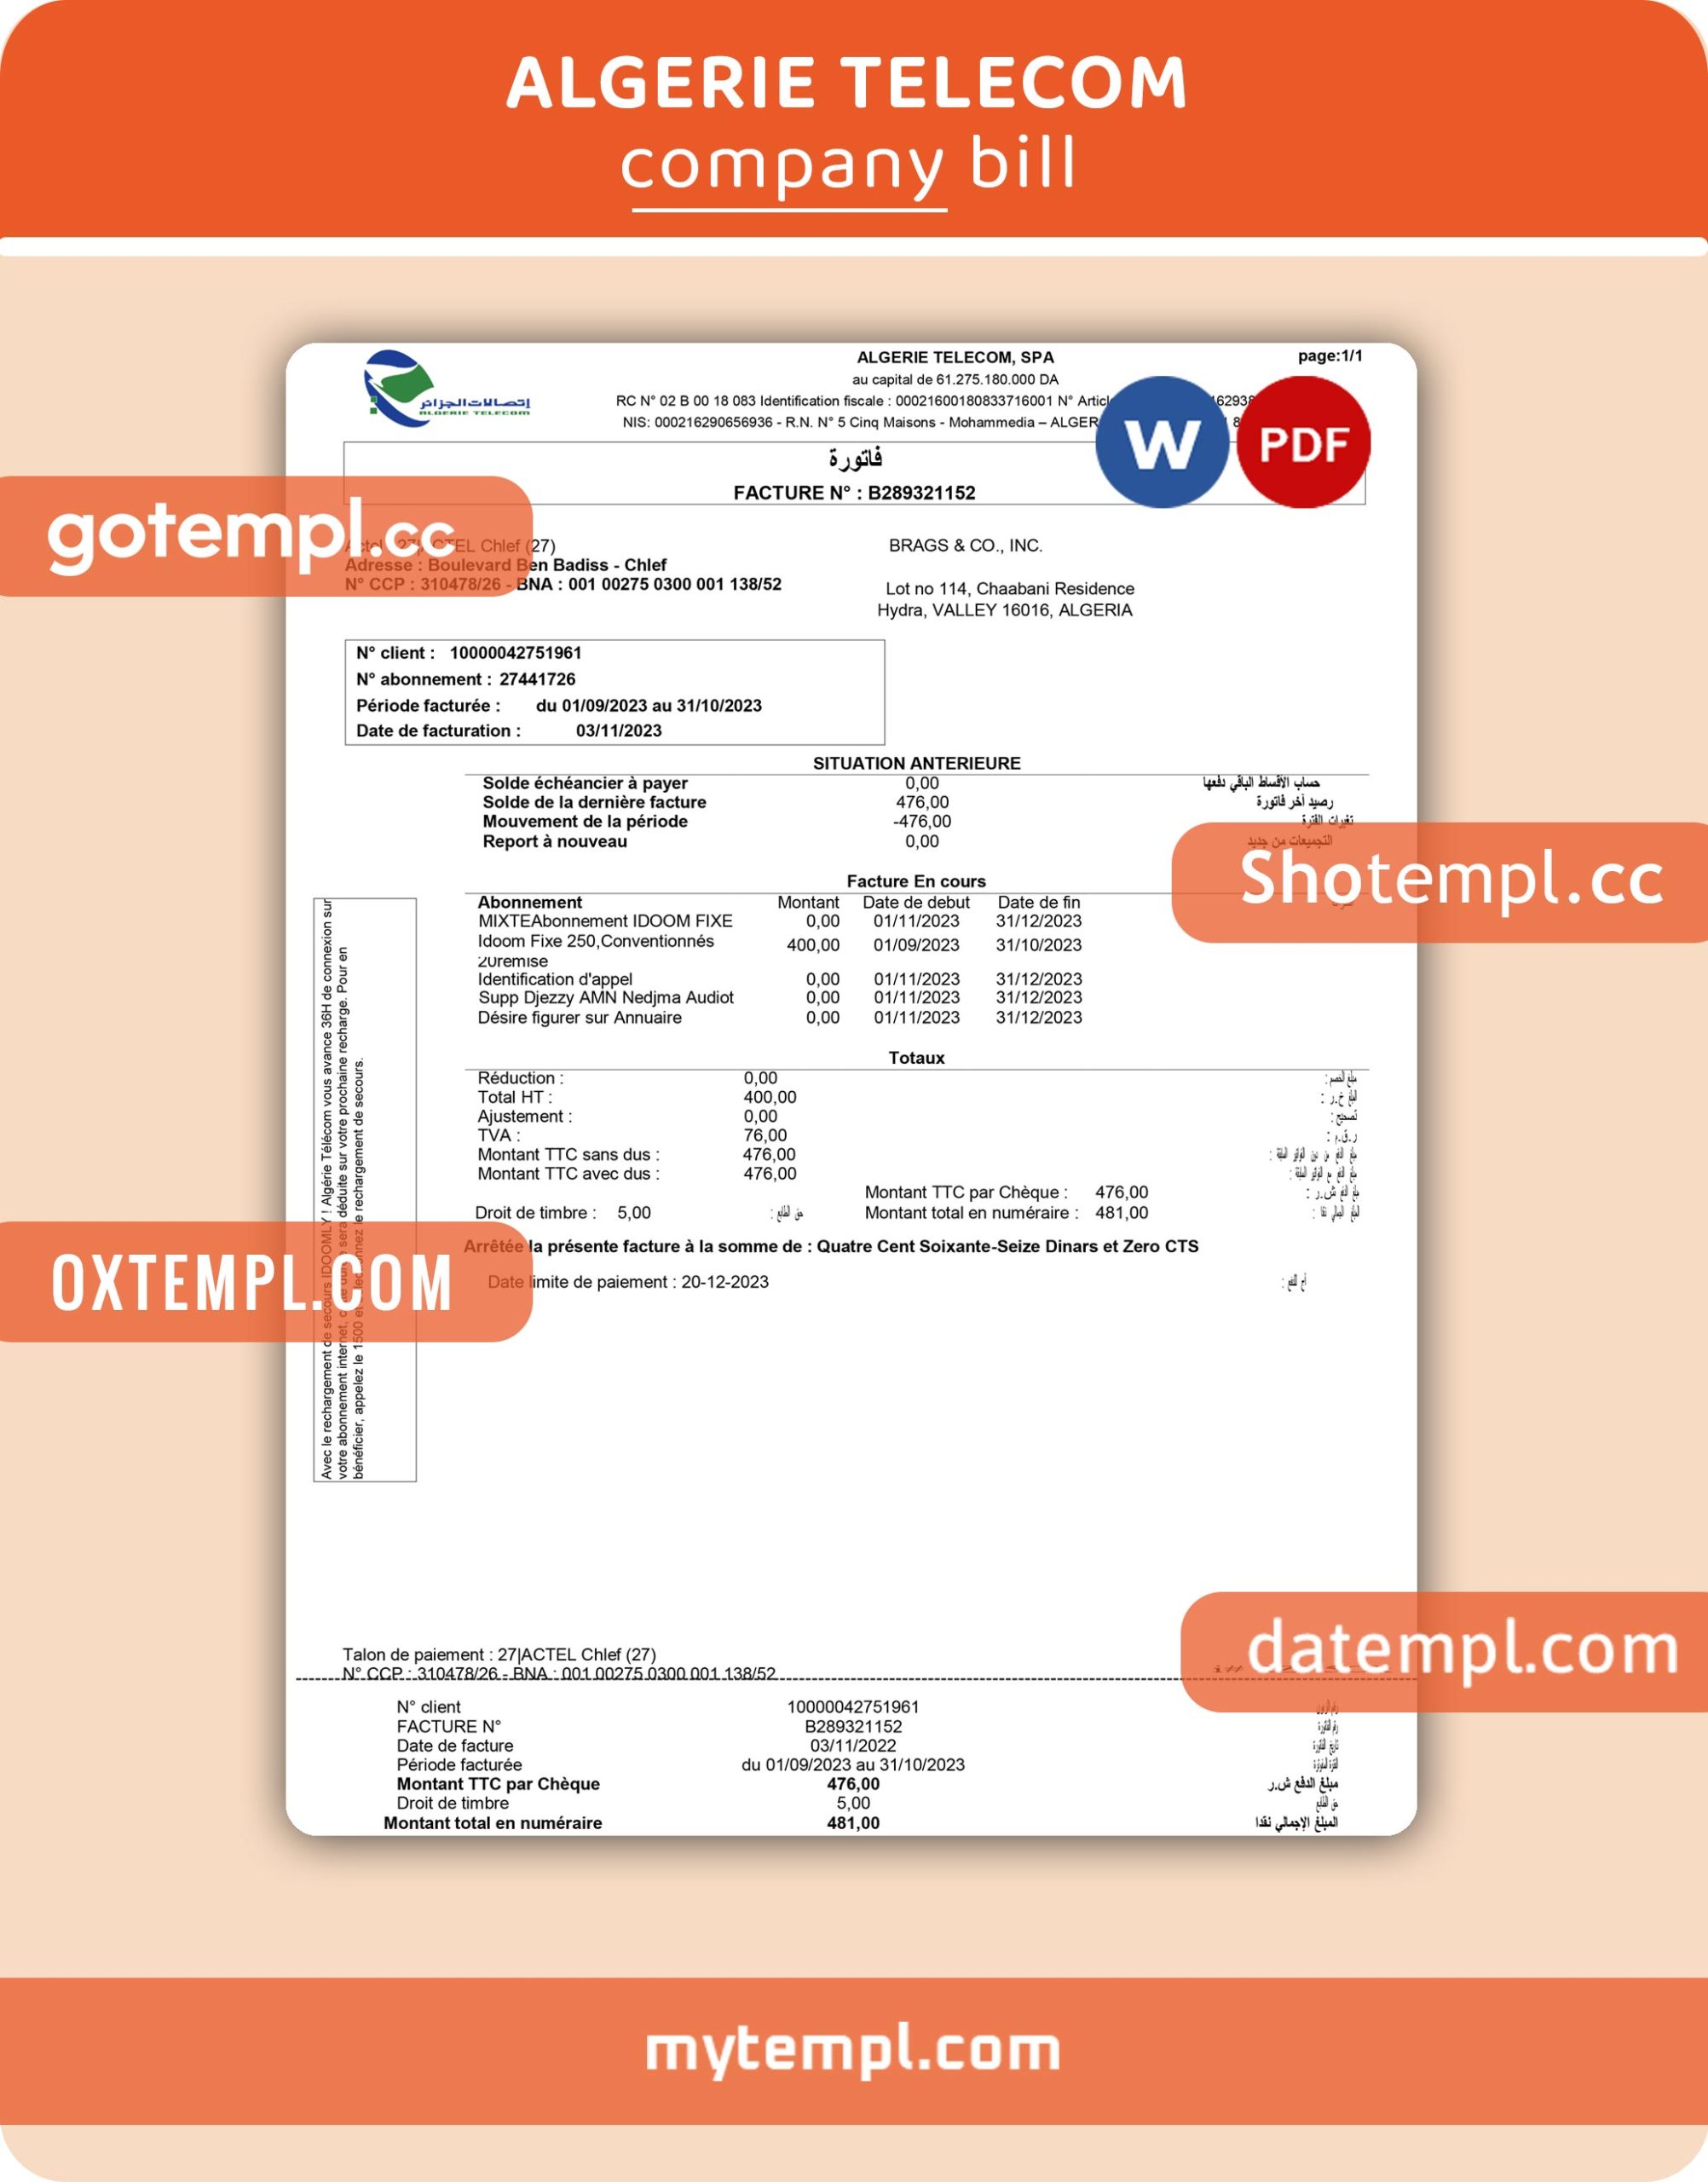 Algerie Telecom business utility bill, Word and PDF template